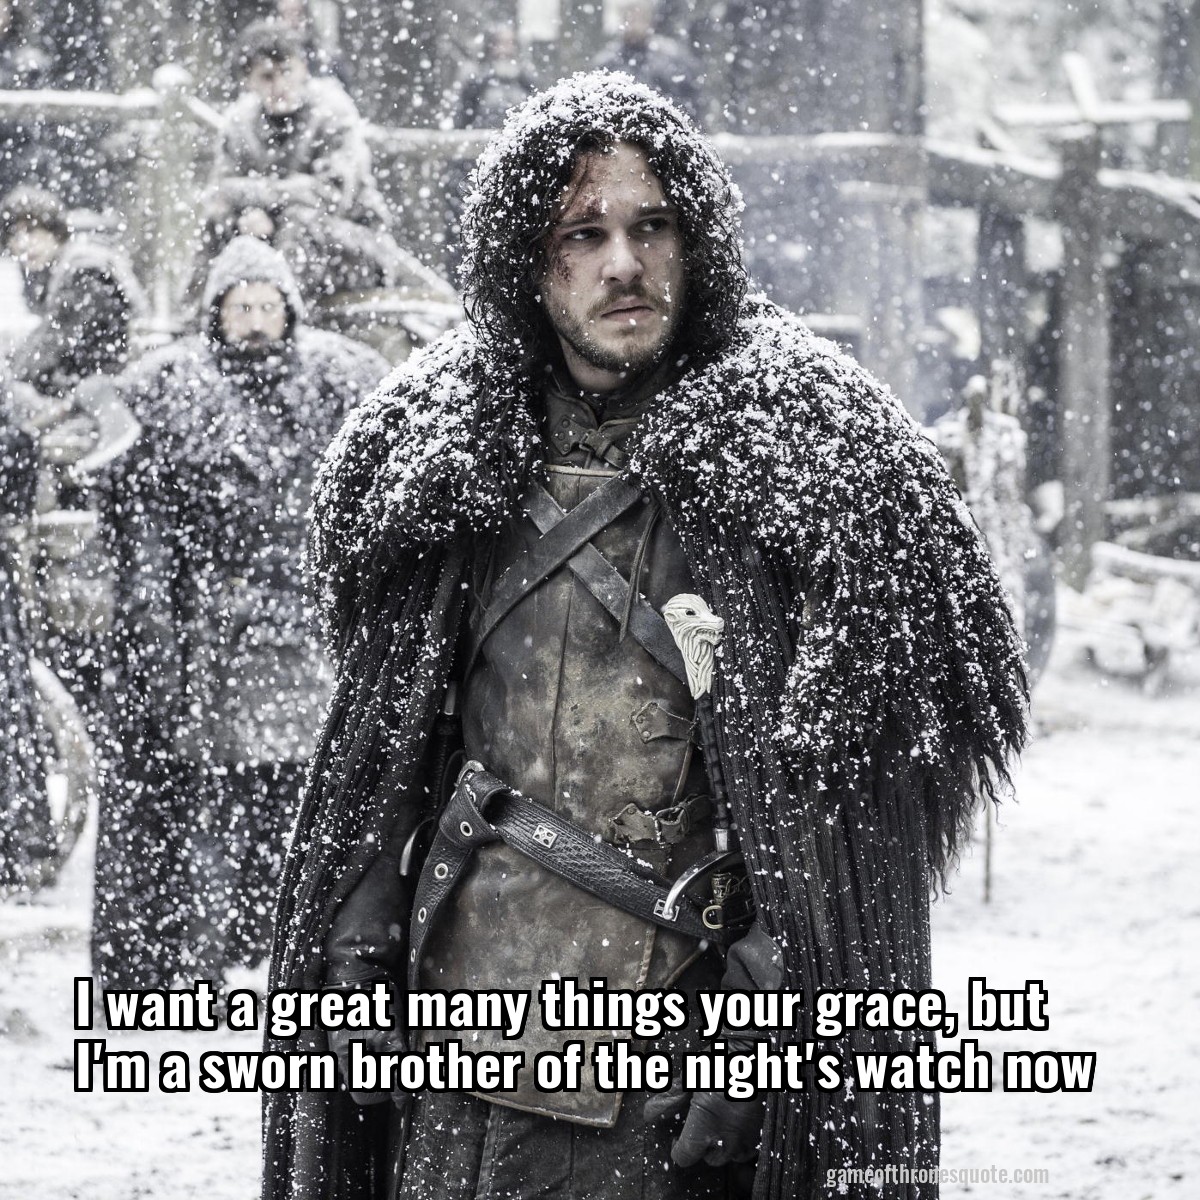 I want a great many things your grace, but I'm a sworn brother of the night's watch now